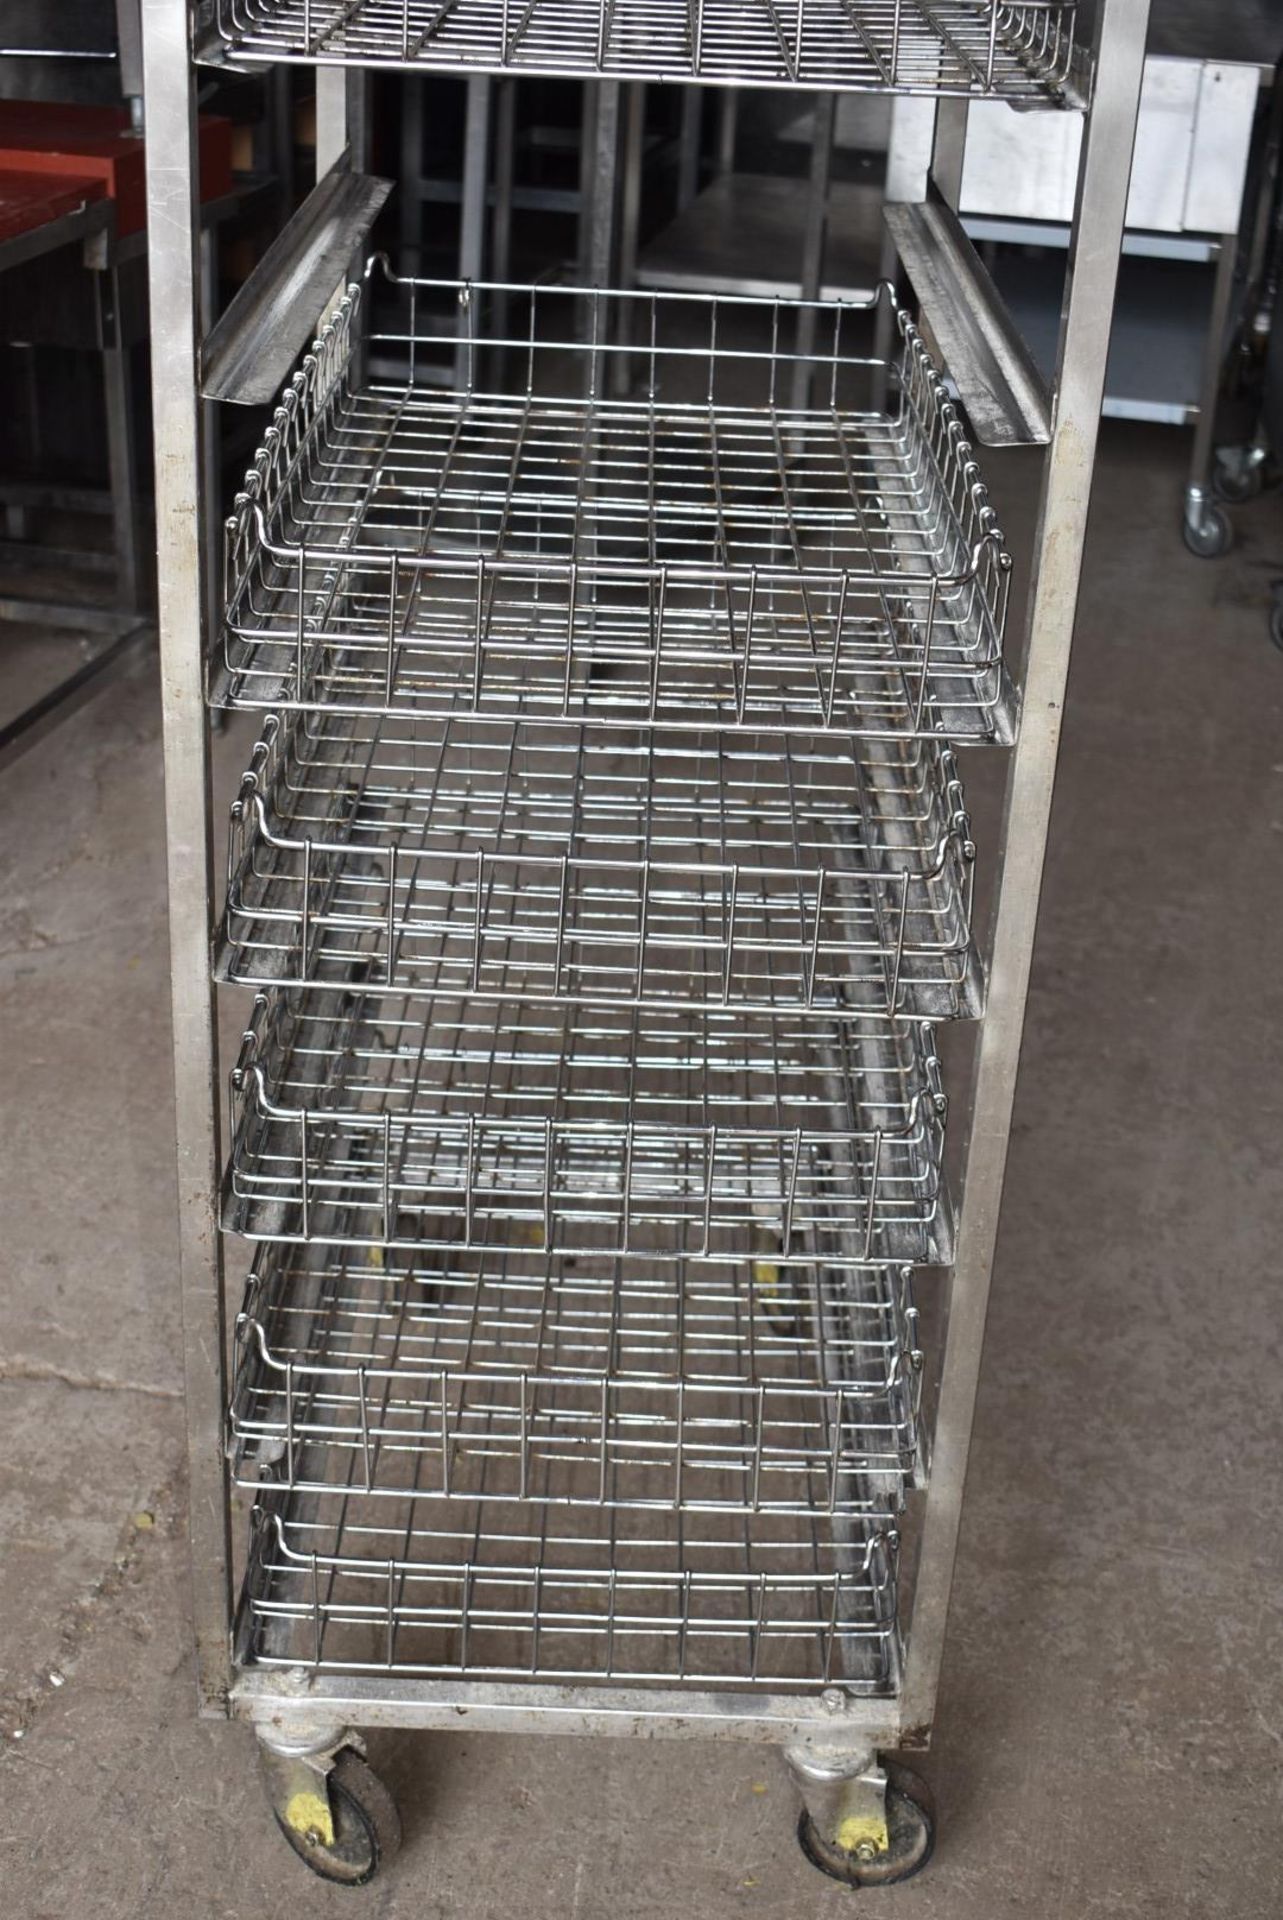 1 x Bakers 11 Tier Mobile Tray Rack With 7 Removable Wire Baskets - Stainless Steel With Castors - - Image 3 of 8